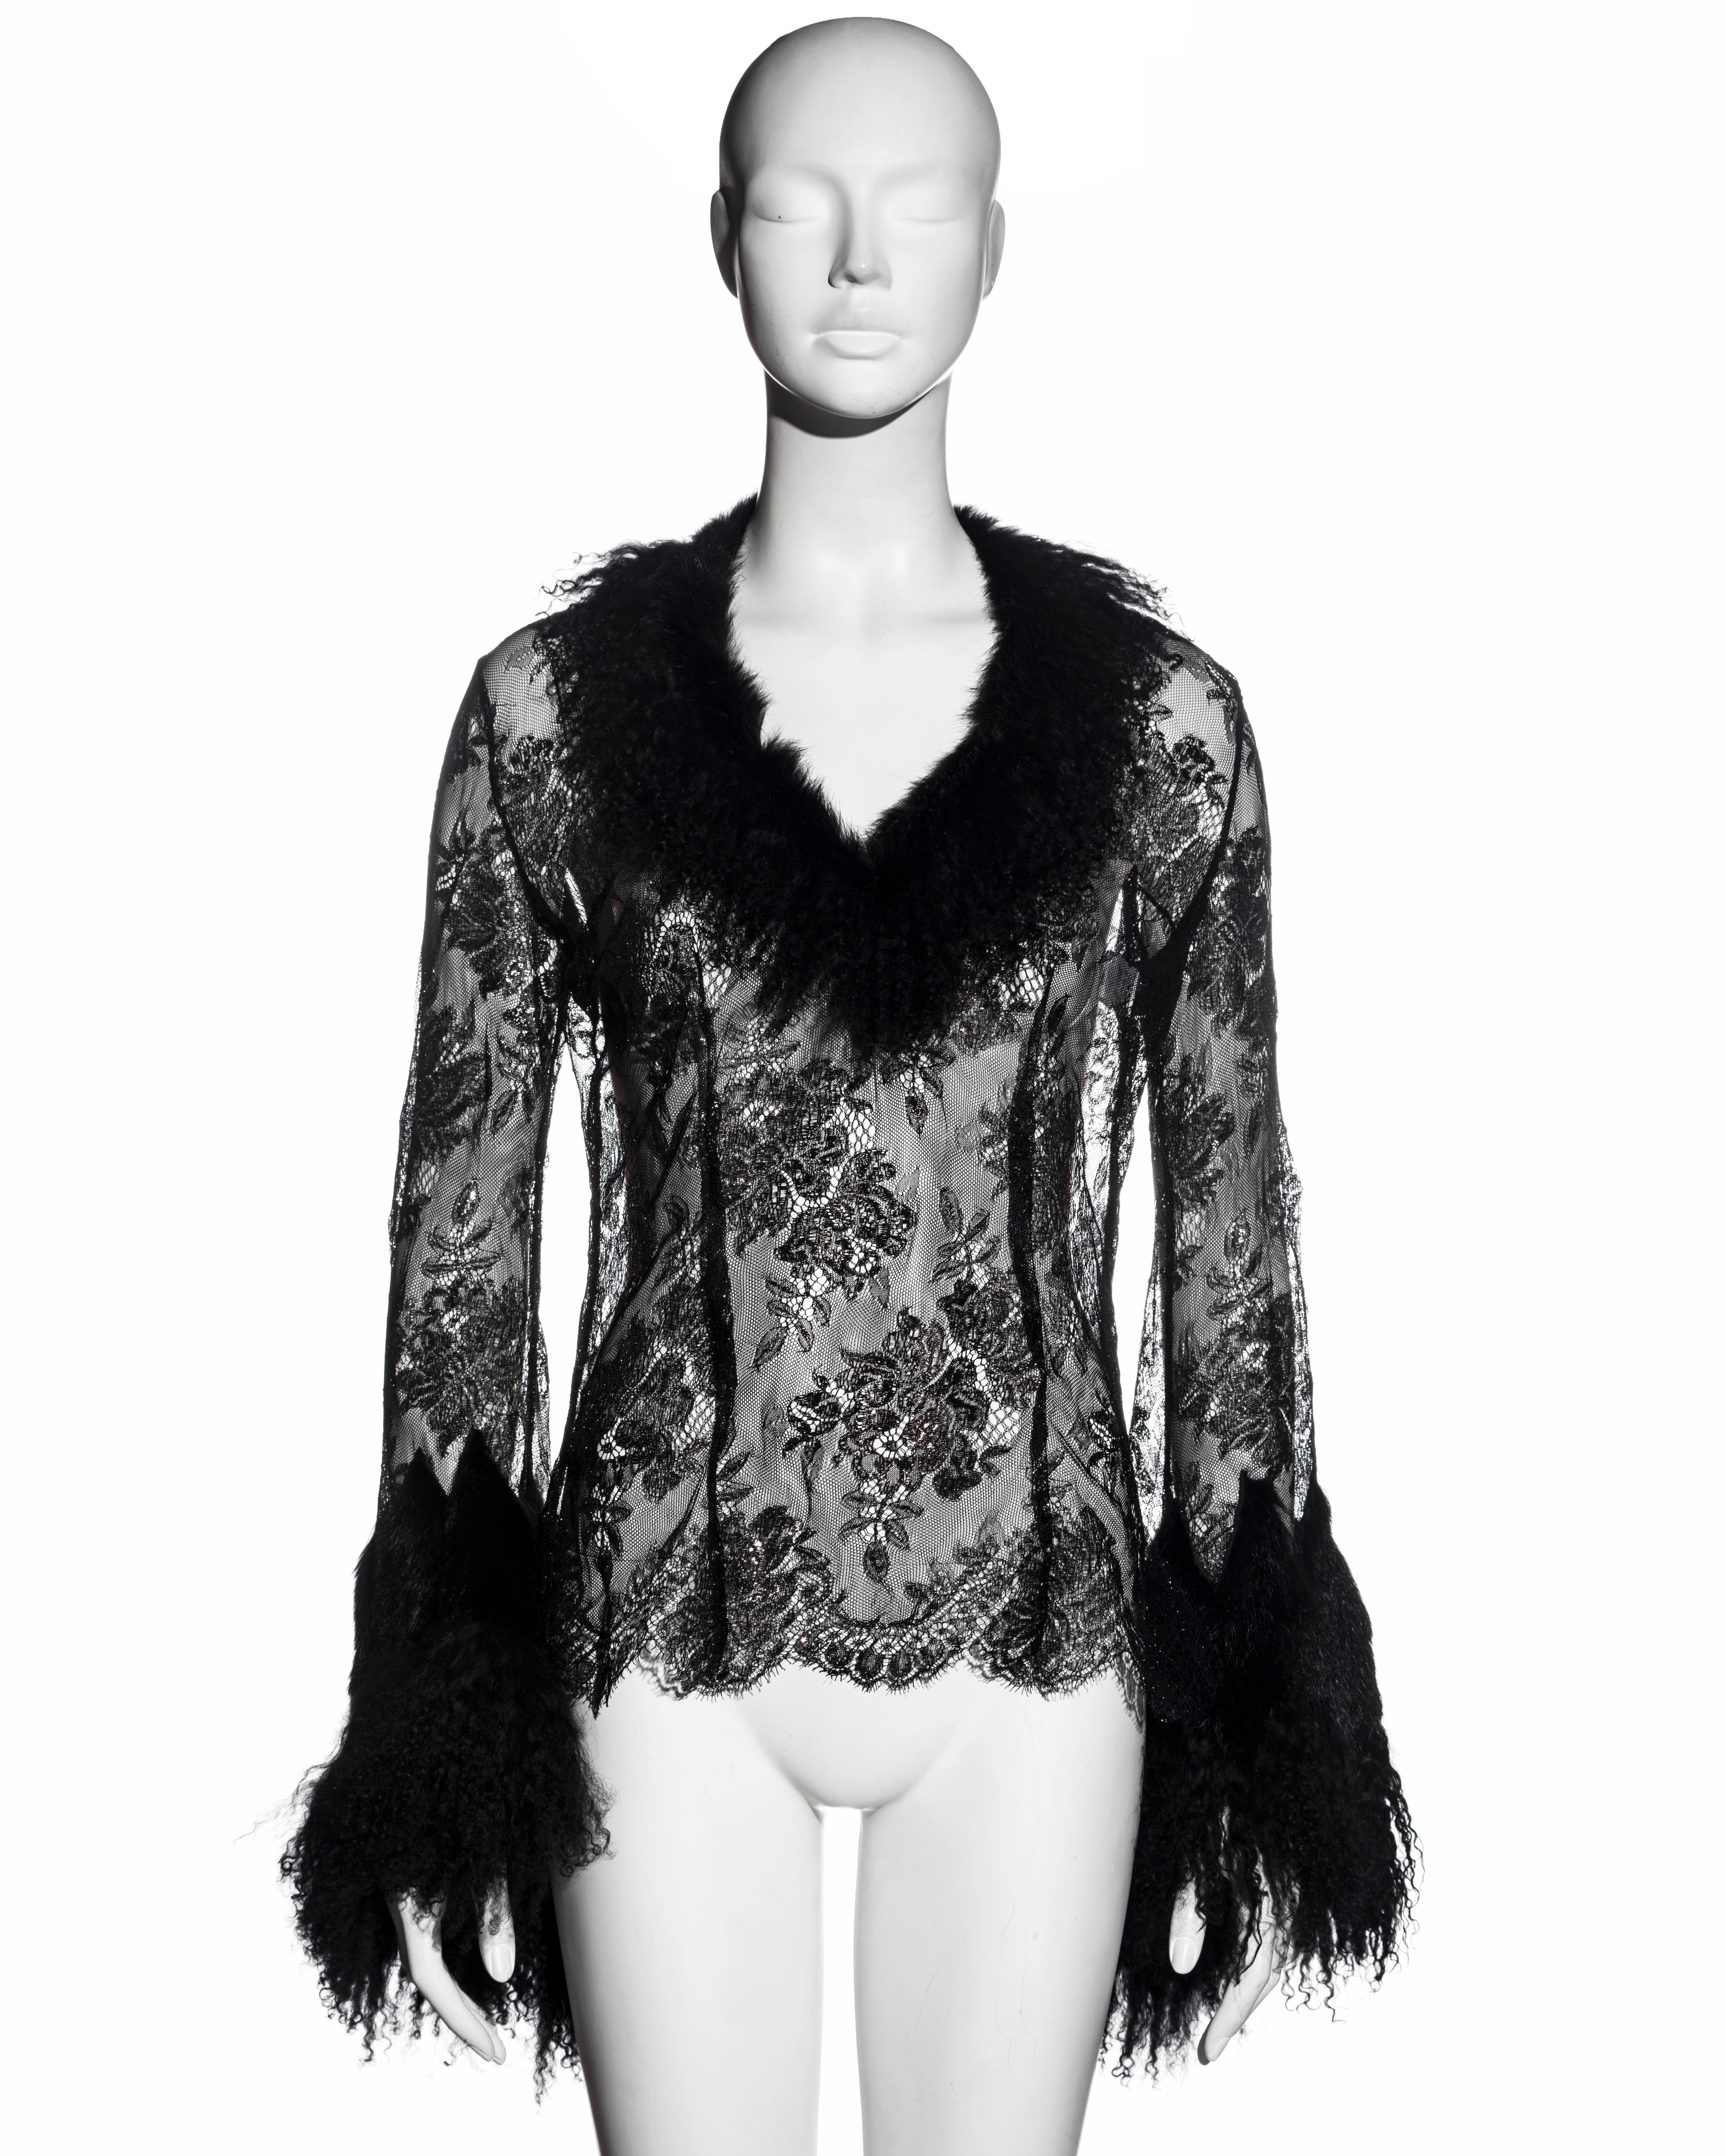 ▪ Roberto Cavalli black lace blouse 
▪ Collar and sleeves of black Mongolian lamb's fur 
▪ Black lace with metallic purple thread
▪ Bell sleeves 
▪ V-neck 
▪ Size Small
▪ Fall-Winter 1999